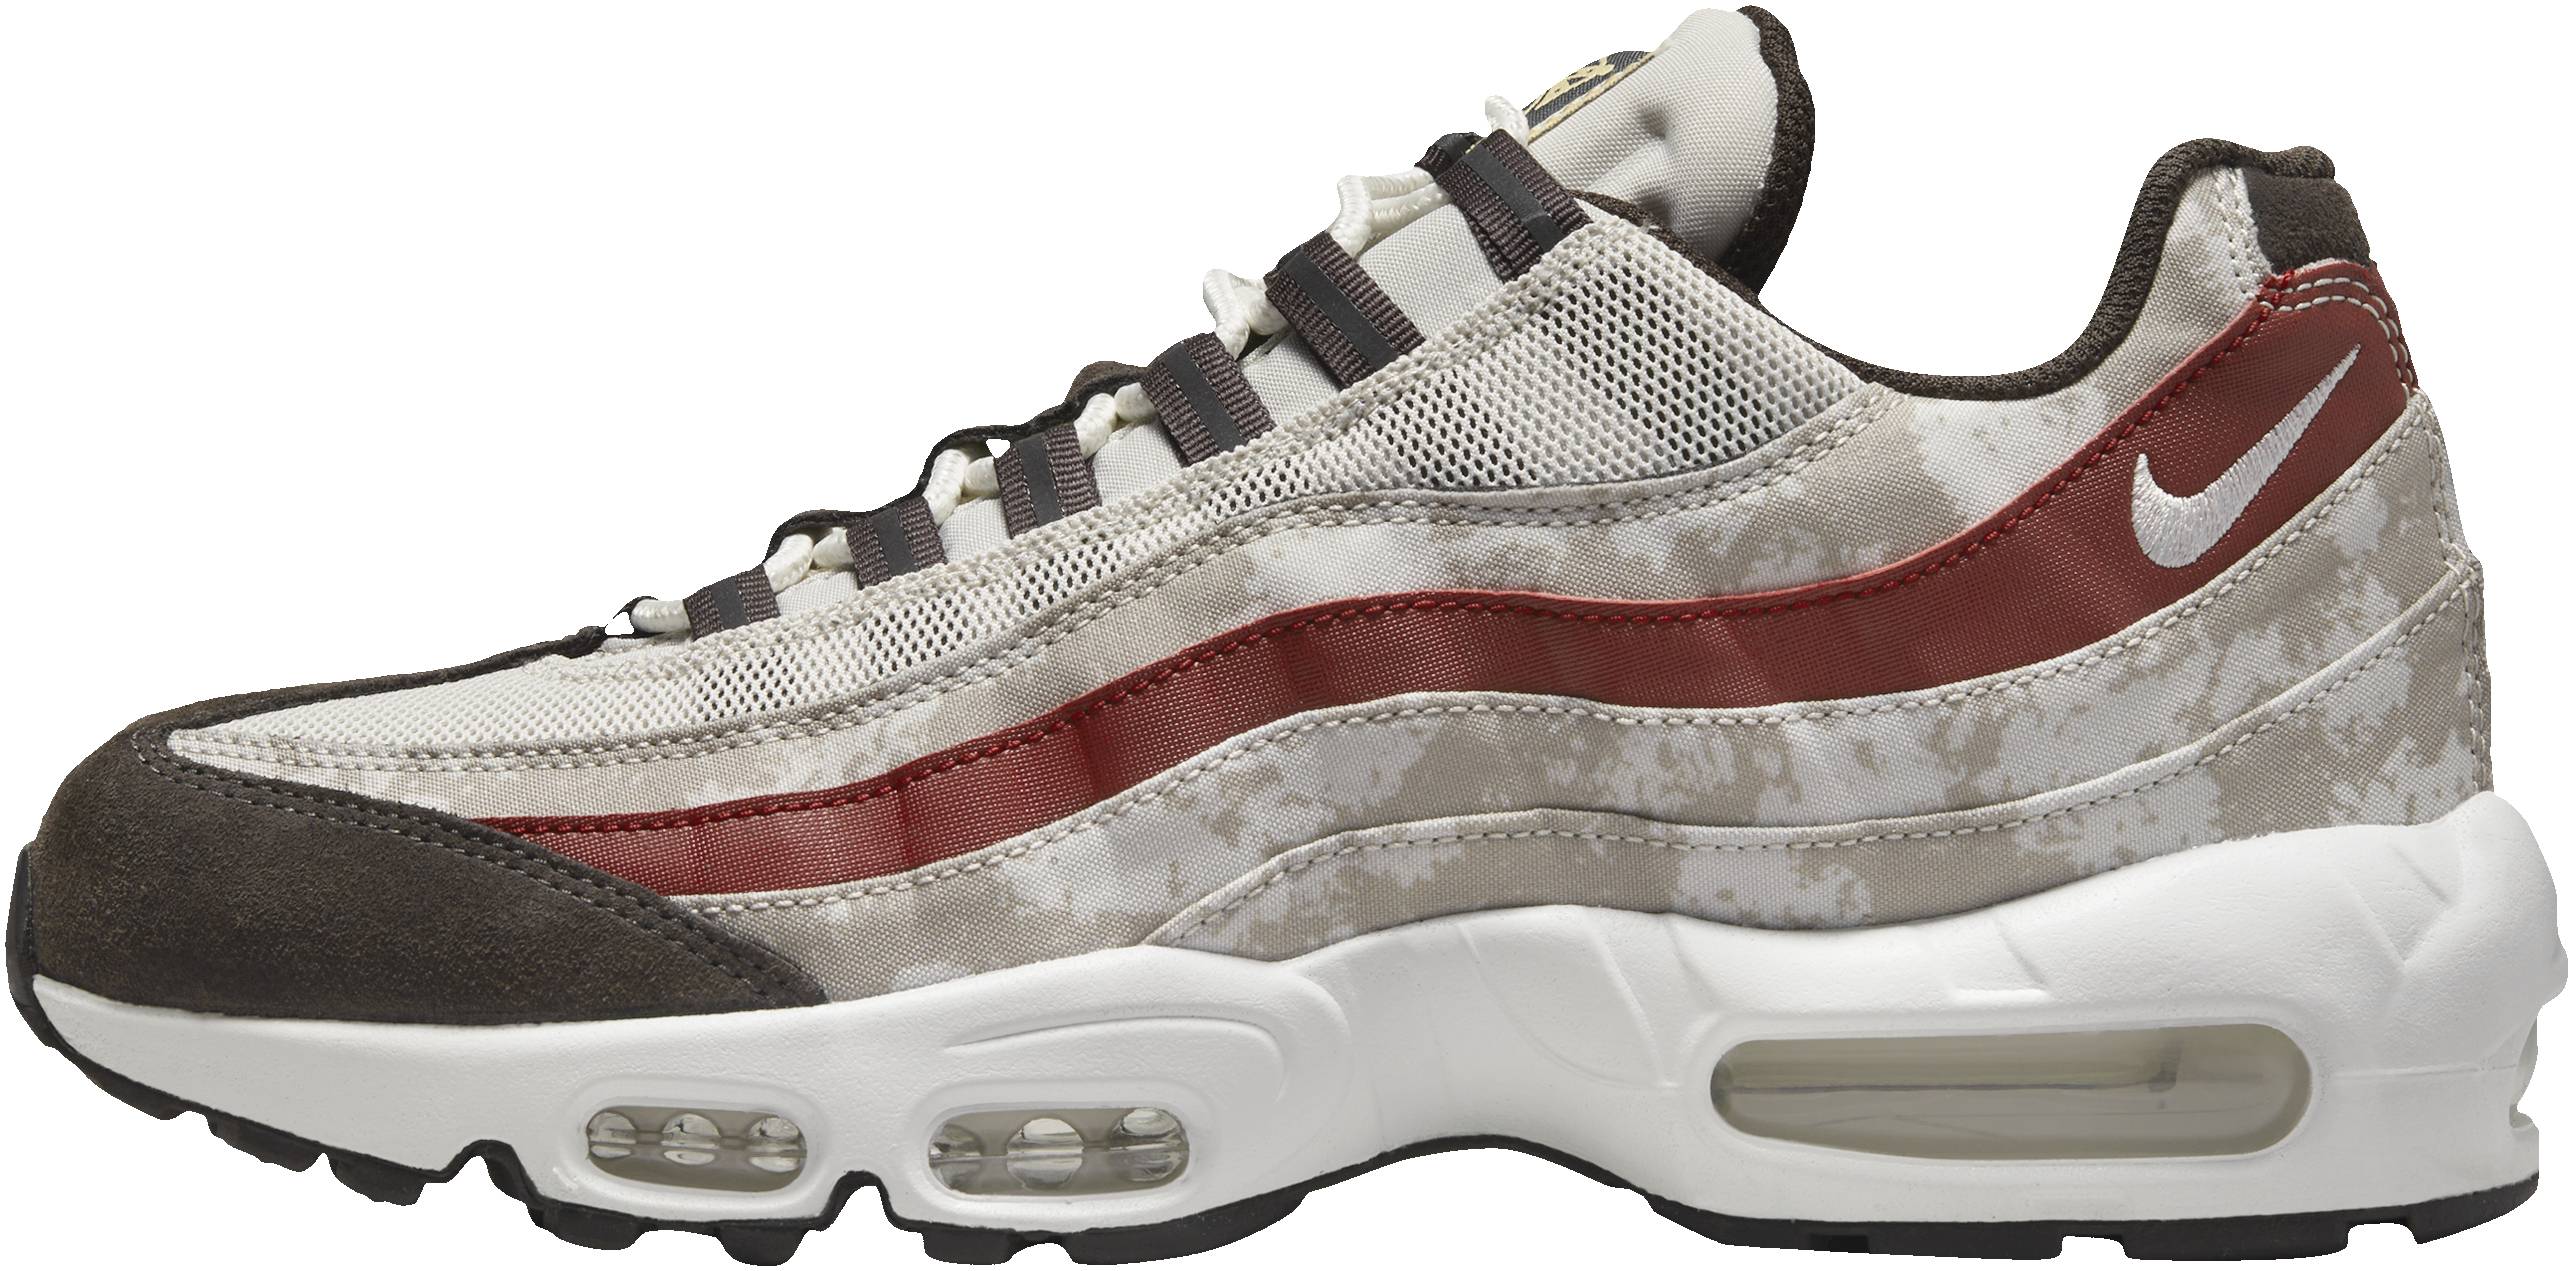 By handcuffs neighbor Nike Air Max 95 sneakers in 50+ colors (only $100) | RunRepeat